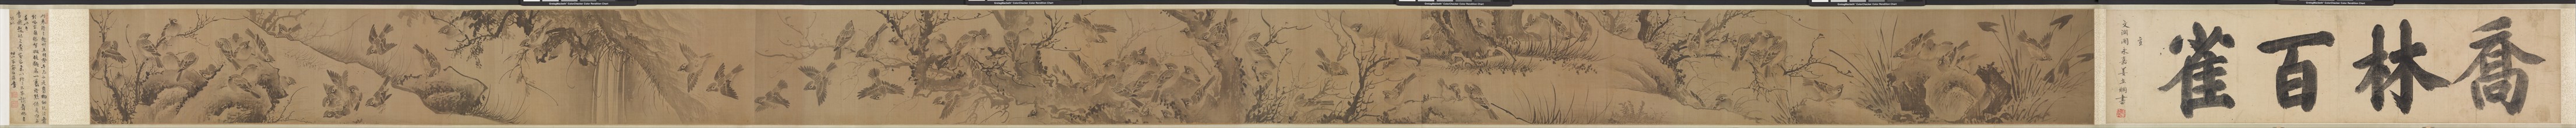 A Hundred Sparrows in a Lofty Grove (Qiaolin baique tu), 1368-1644. Creator: Lin Liang (Chinese, 1416-1480), attributed to.